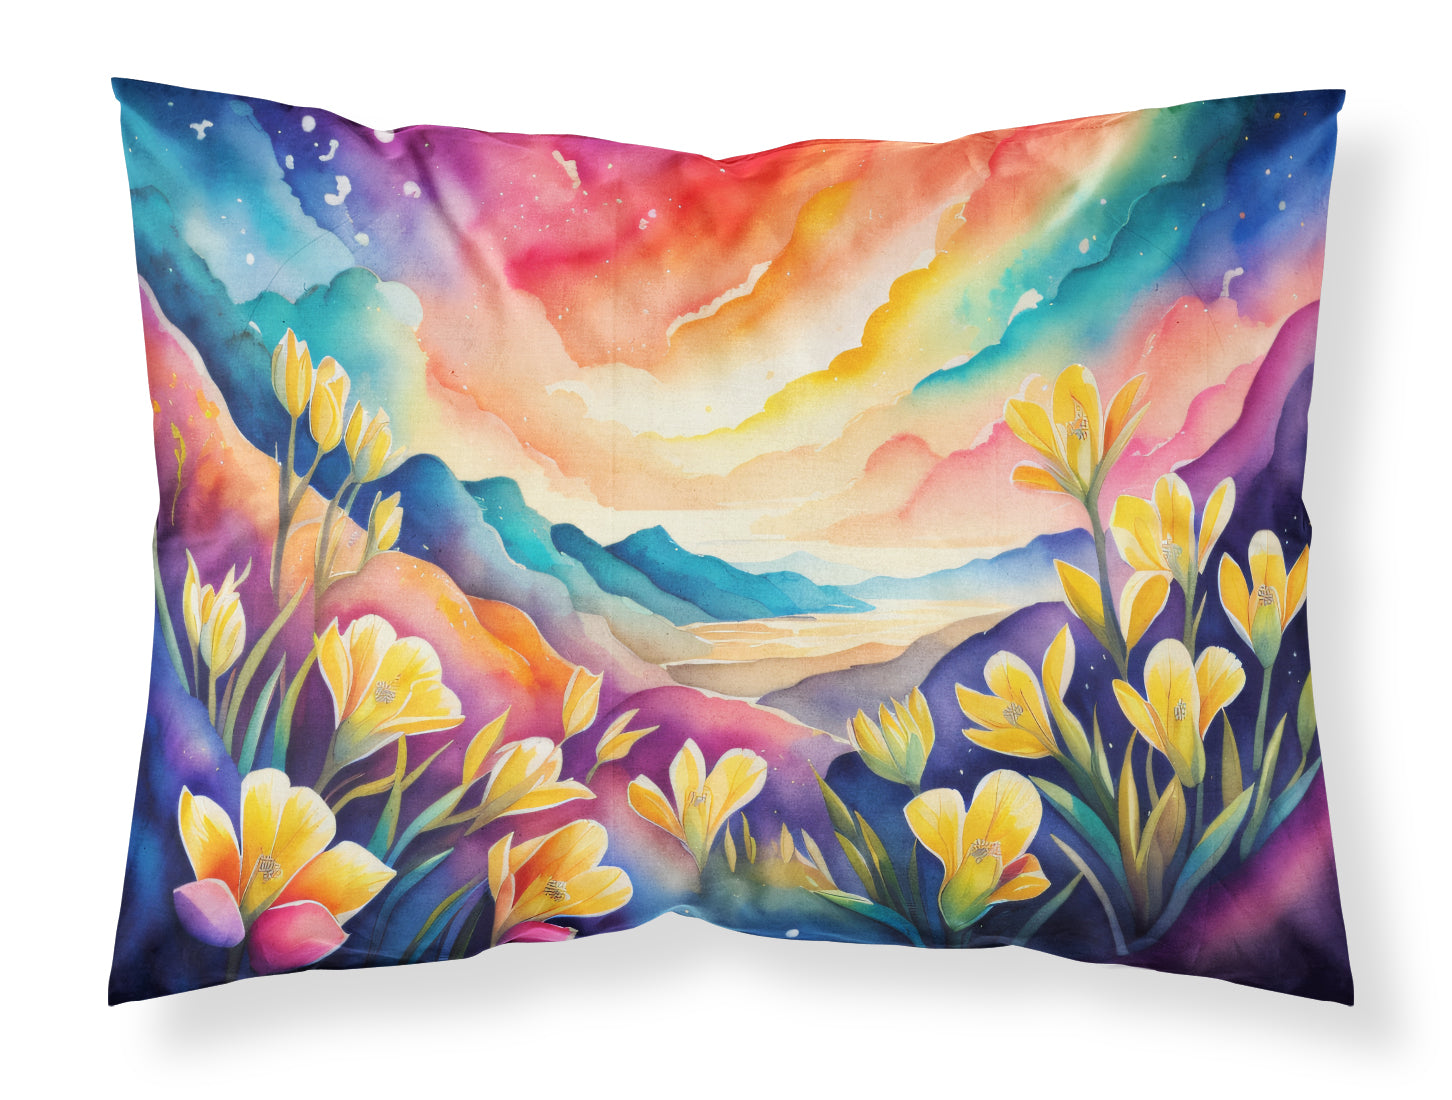 Buy this Freesia in Color Fabric Standard Pillowcase